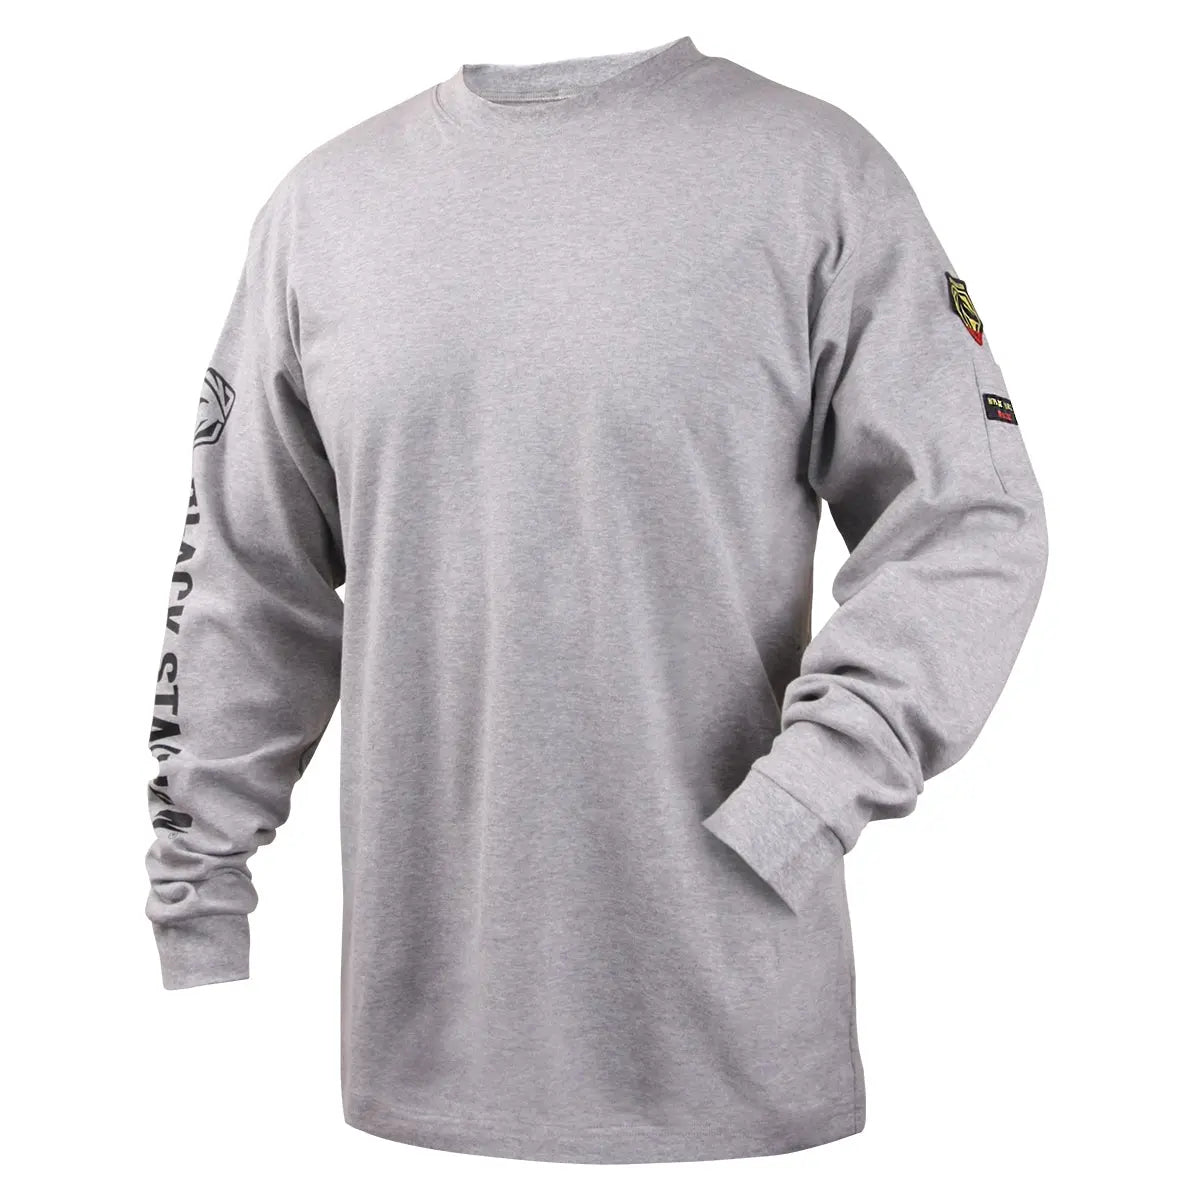 BLACK STALLION - 7 oz. FR Cotton Knit Long-Sleeve T-Shirt, Gray  Becker Safety and Supply